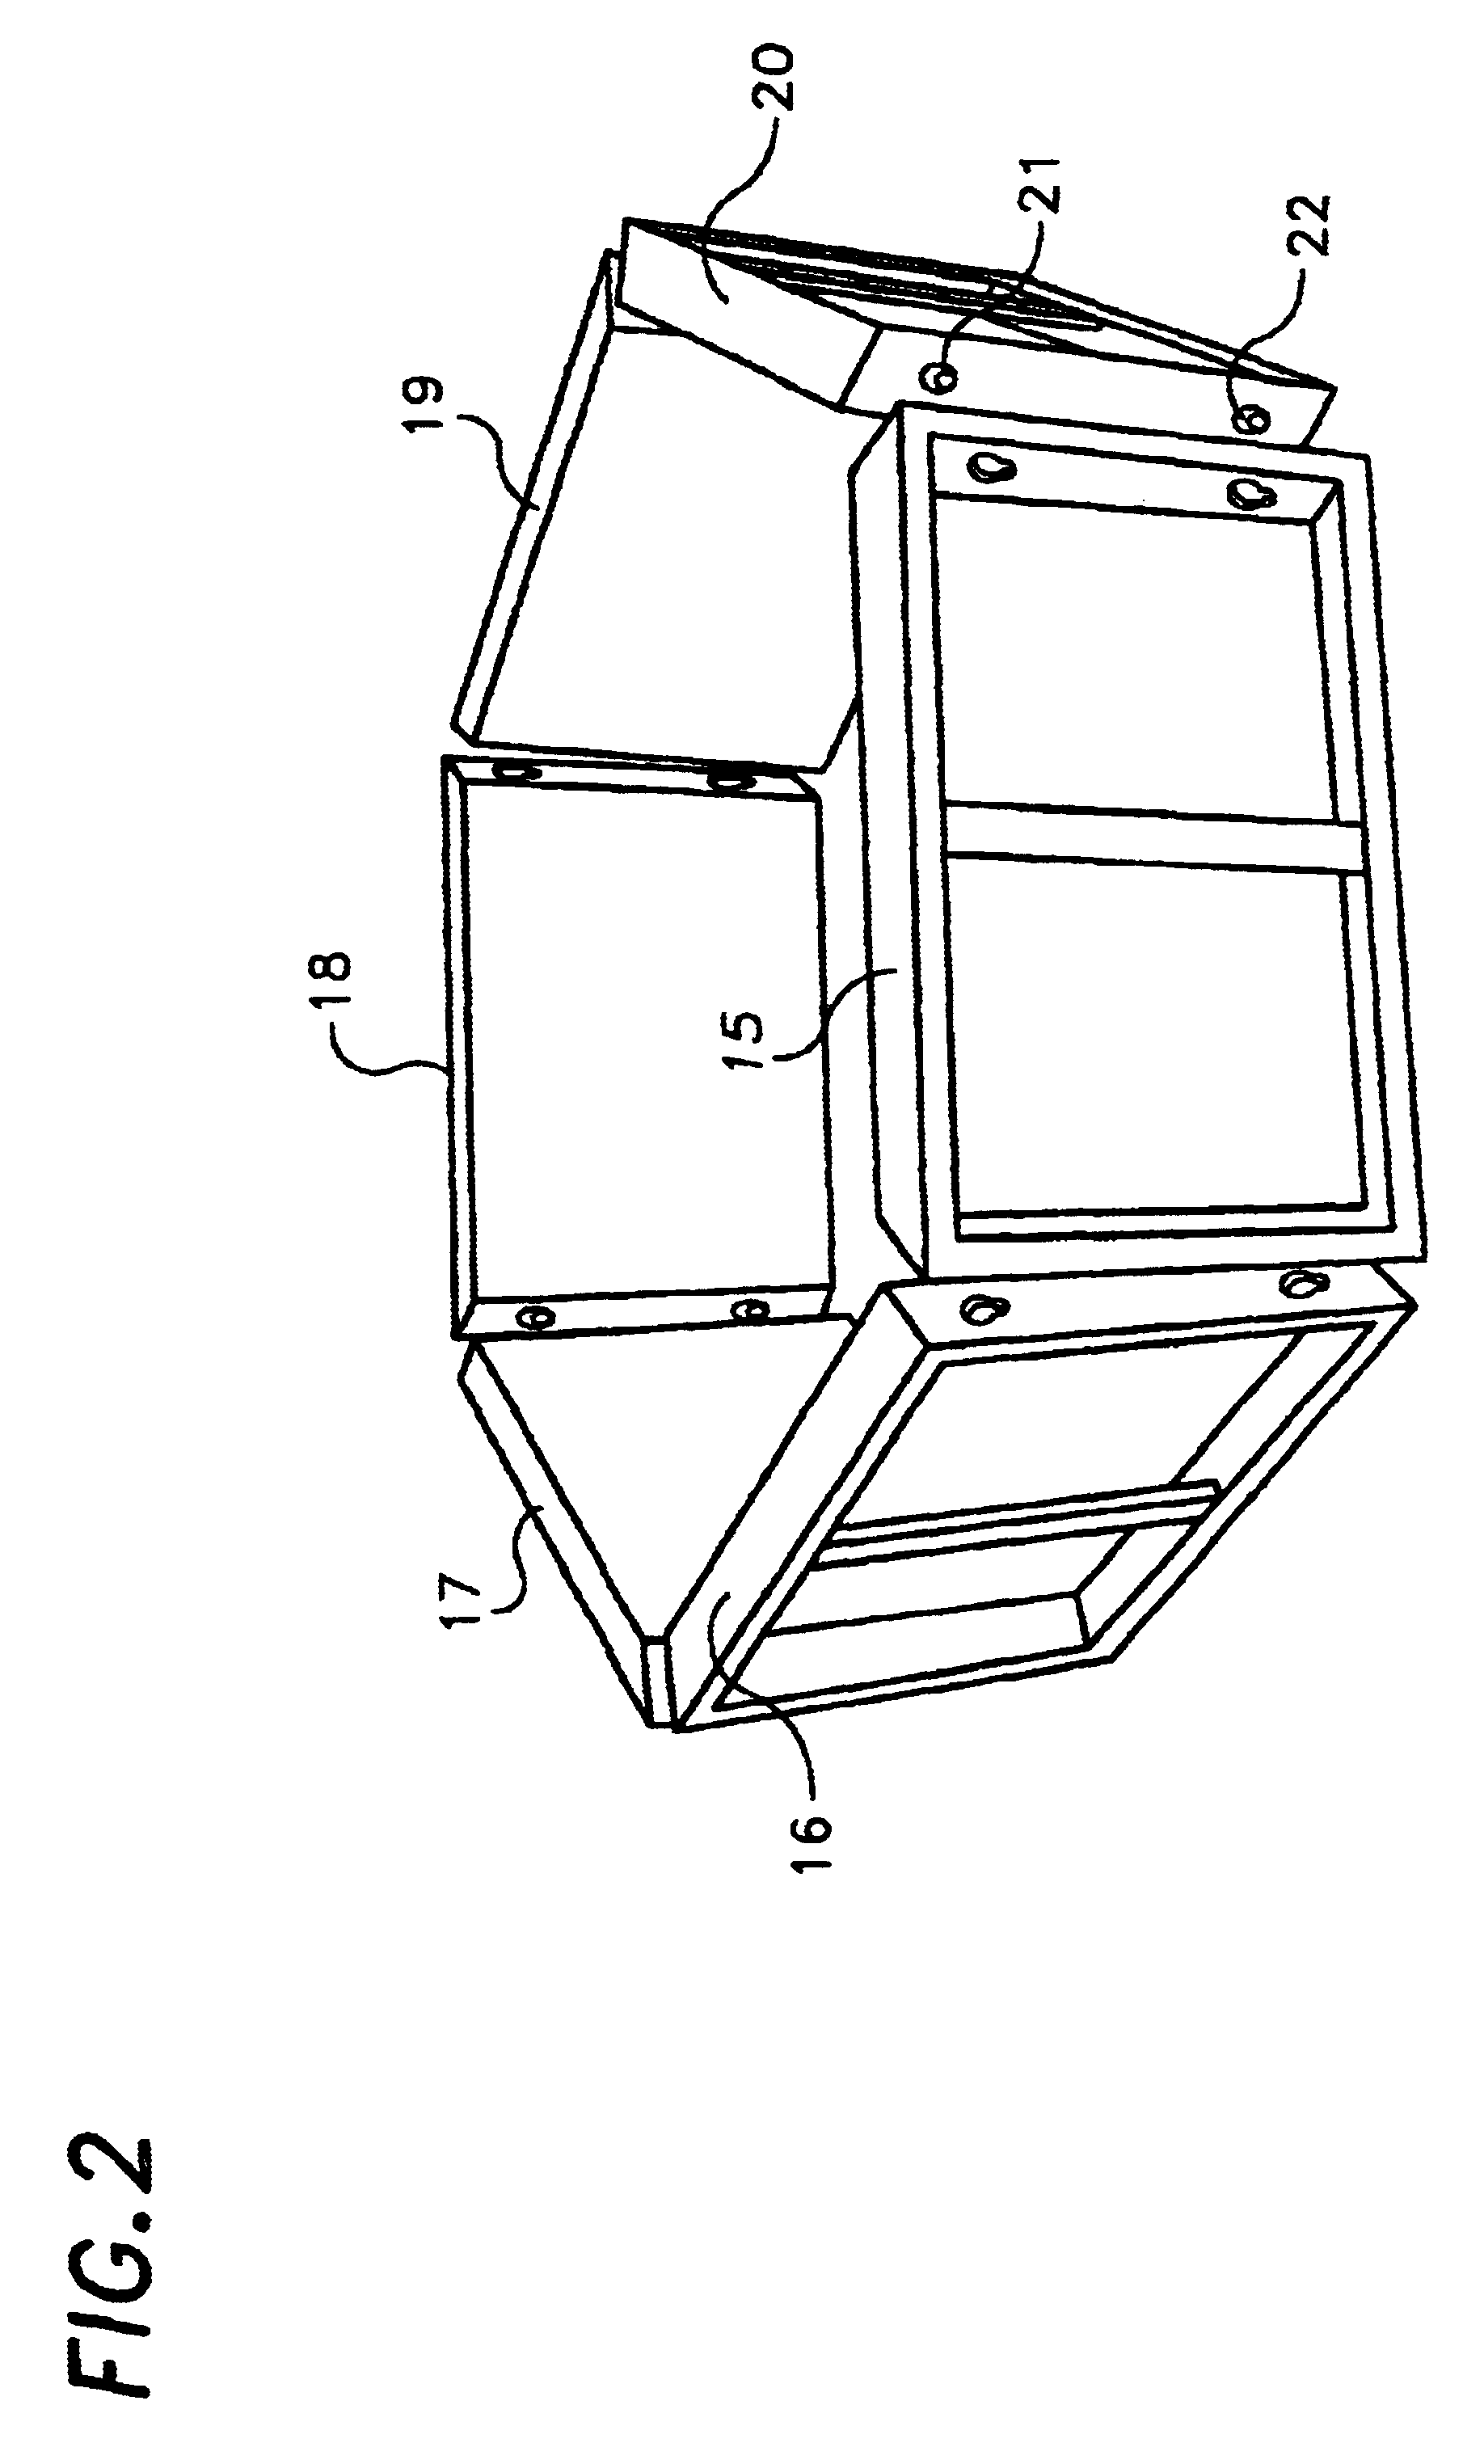 Method for making portable, strong, light-weight and easily assembled containing structures using interlocking panel members